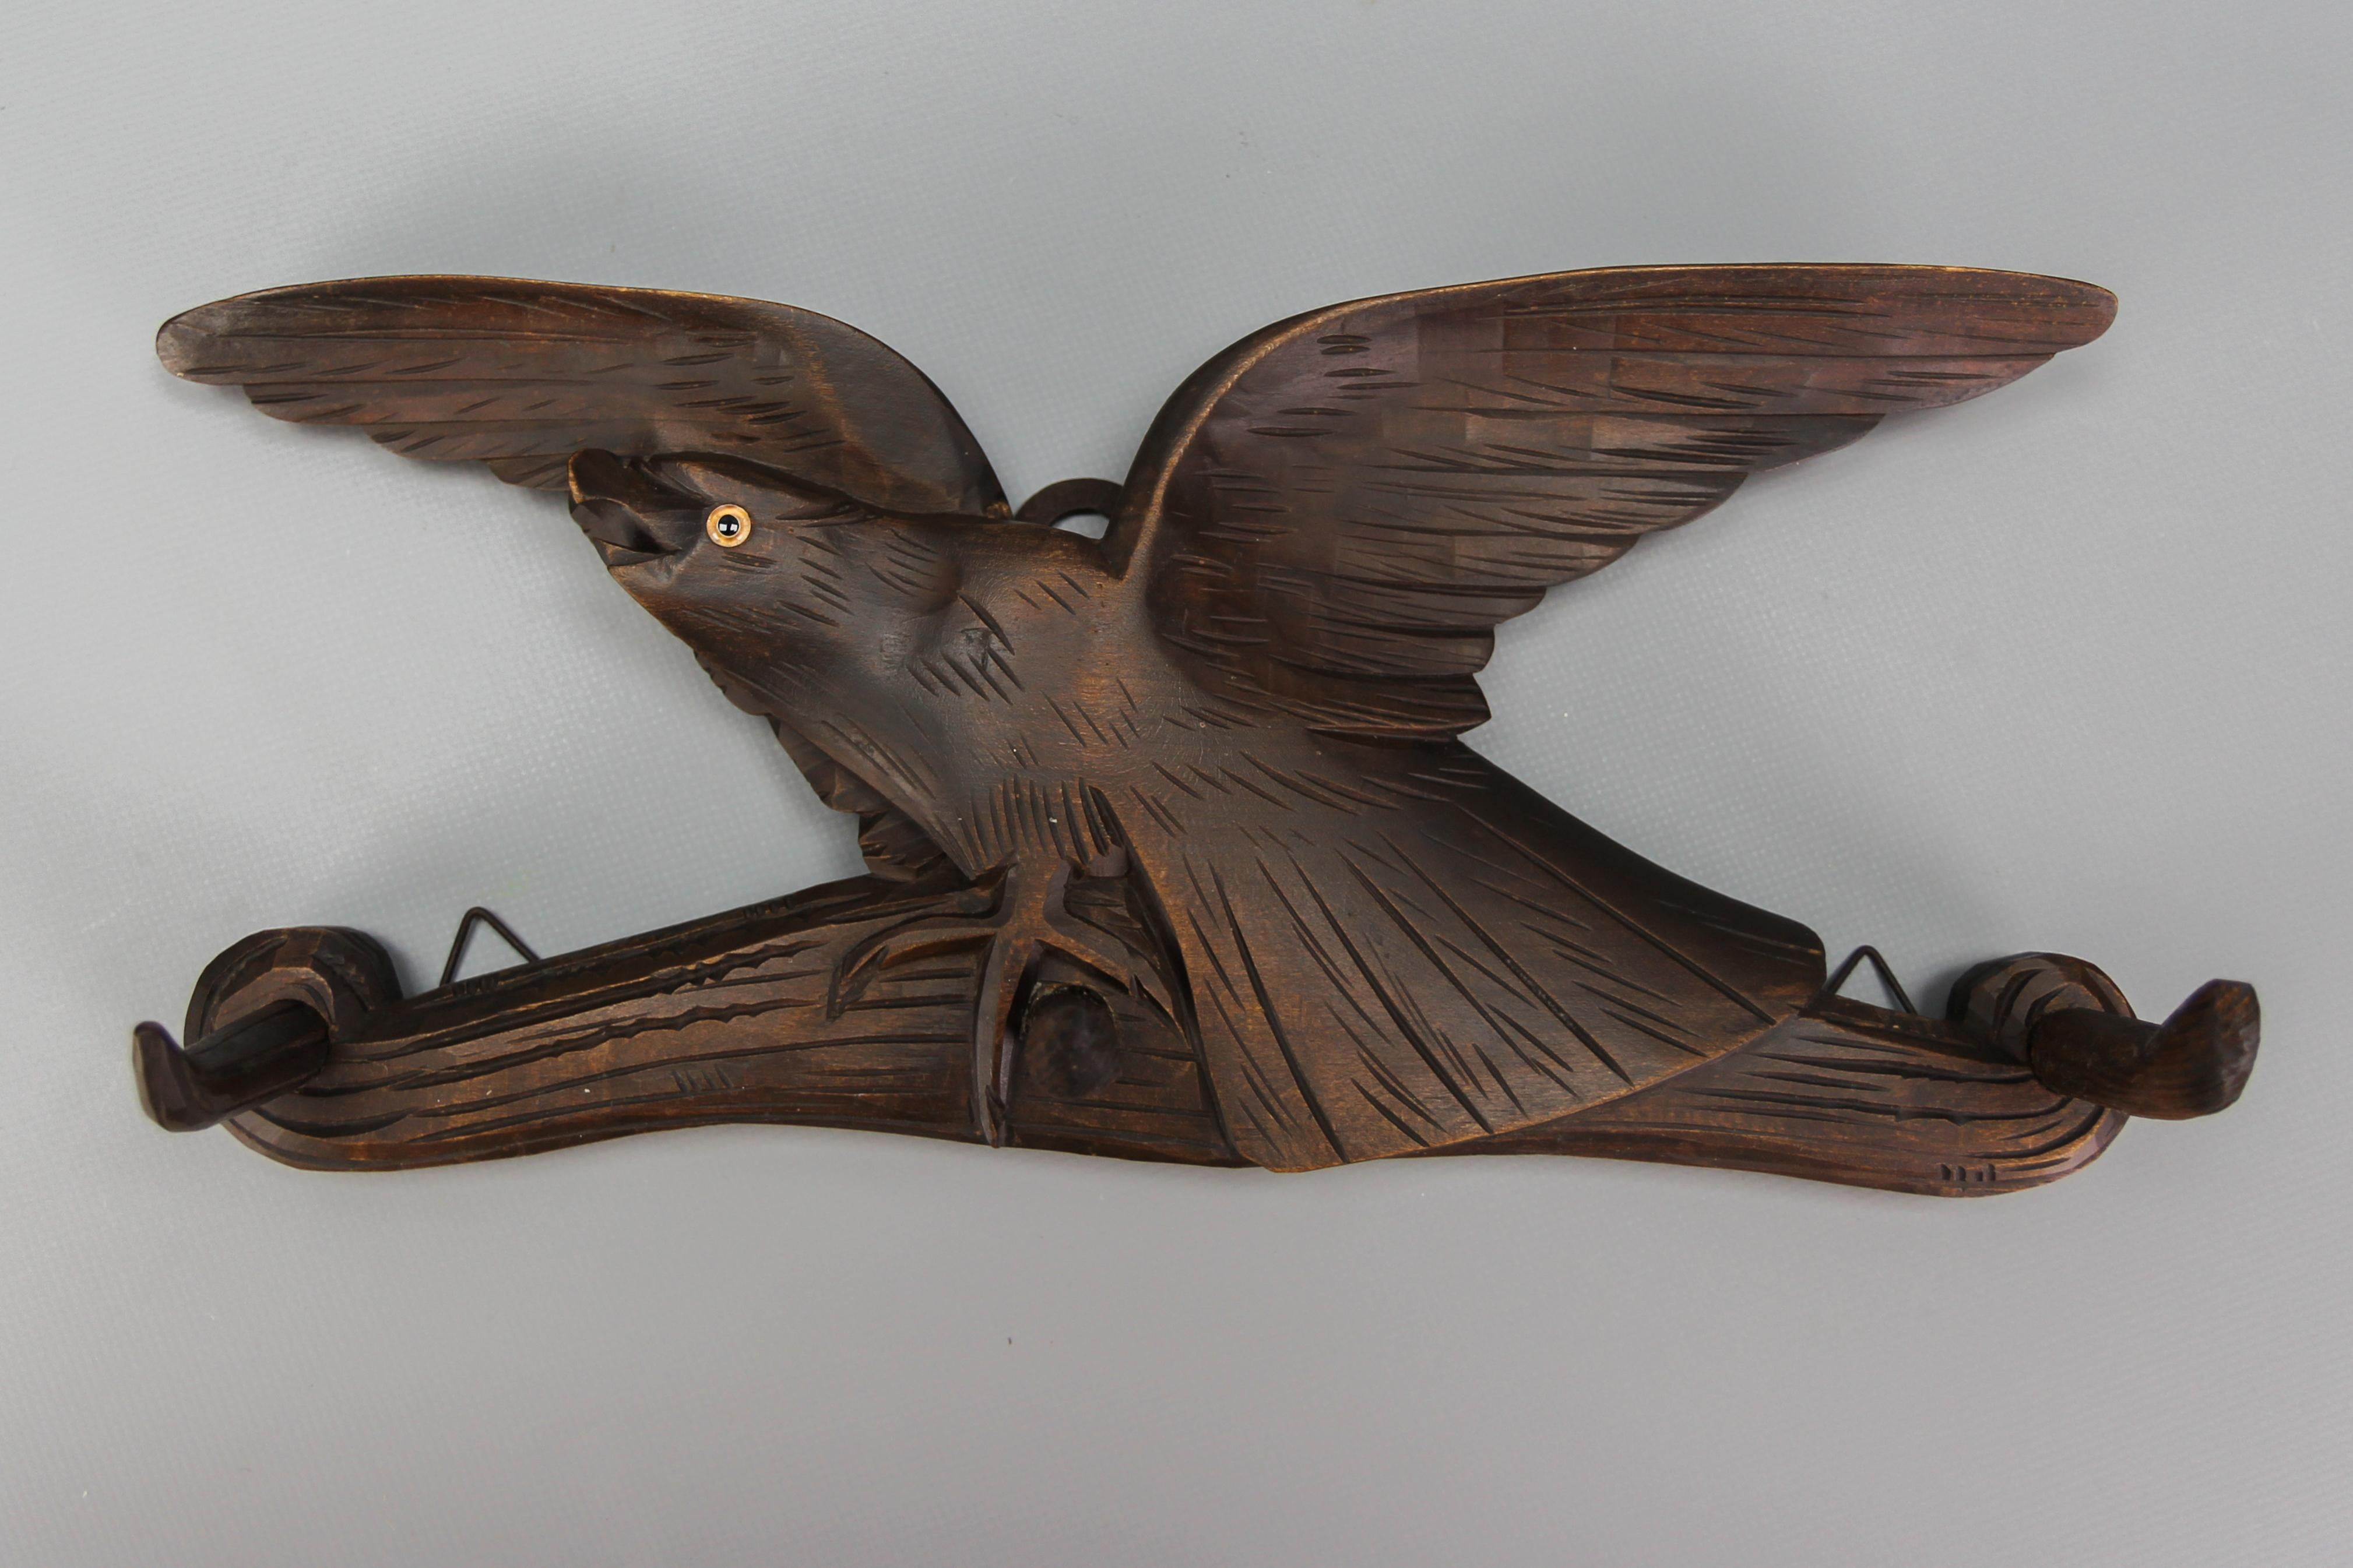 Antique hand-carved hat rack or coat rack with a bird and three wooden hooks
This beautiful, dark brown hand carved wall mount hat rack features three wooden hooks and an expressive hand carved figure of a bird sitting on a branch. Made of linden